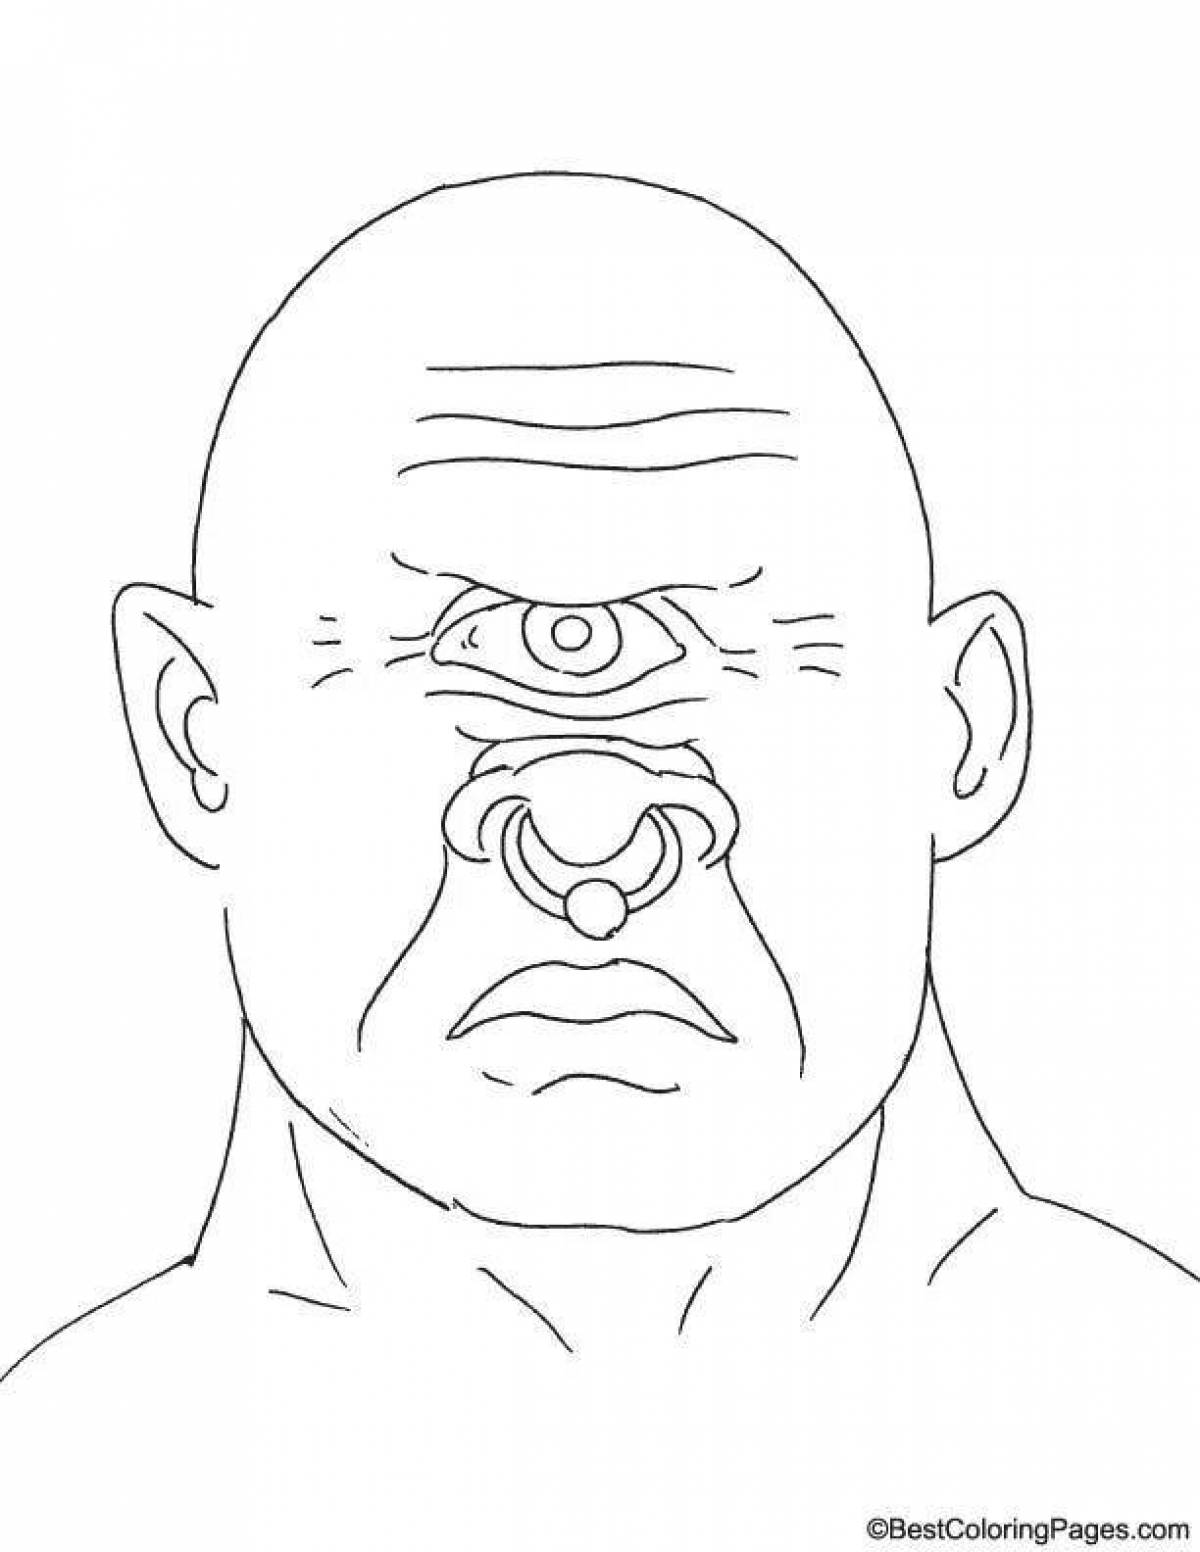 Cyclops Animated Coloring Page